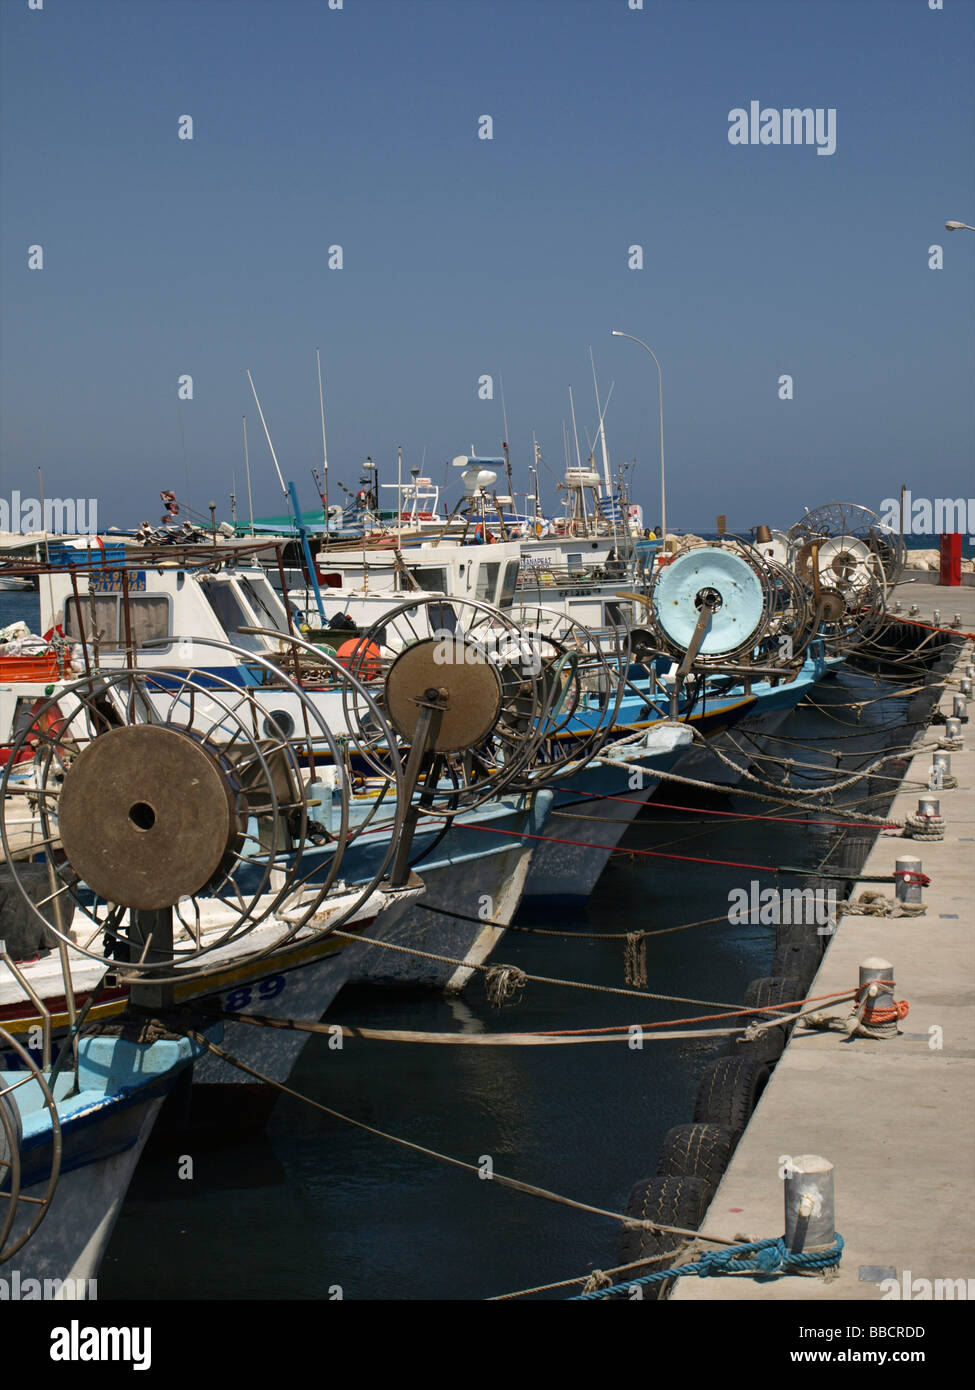 Boats in Cyprus Stock Photo